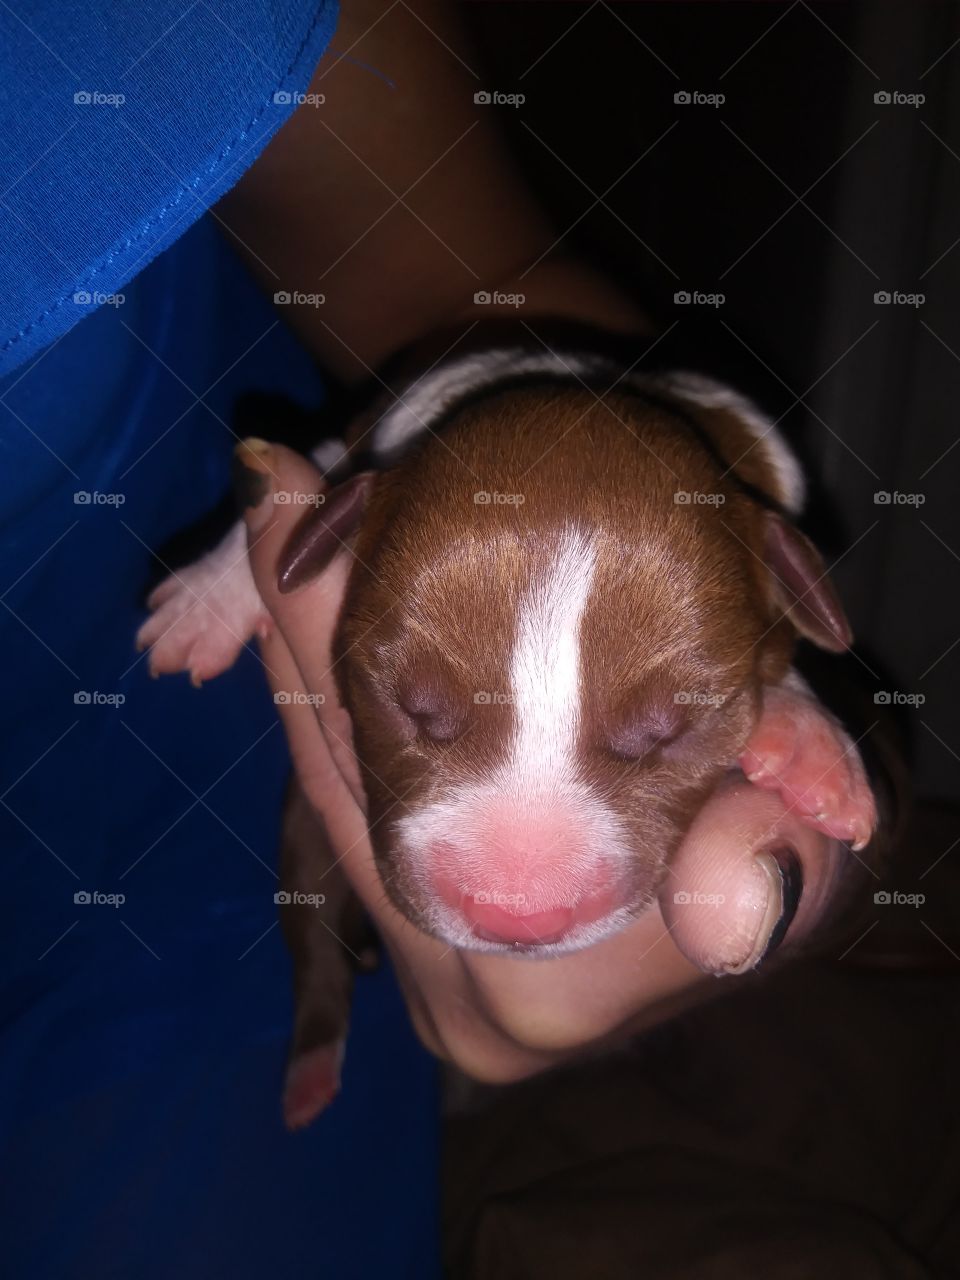 new born puppies. mix breed of a pit bull and pit bull terrier. 1 day old 7 pups